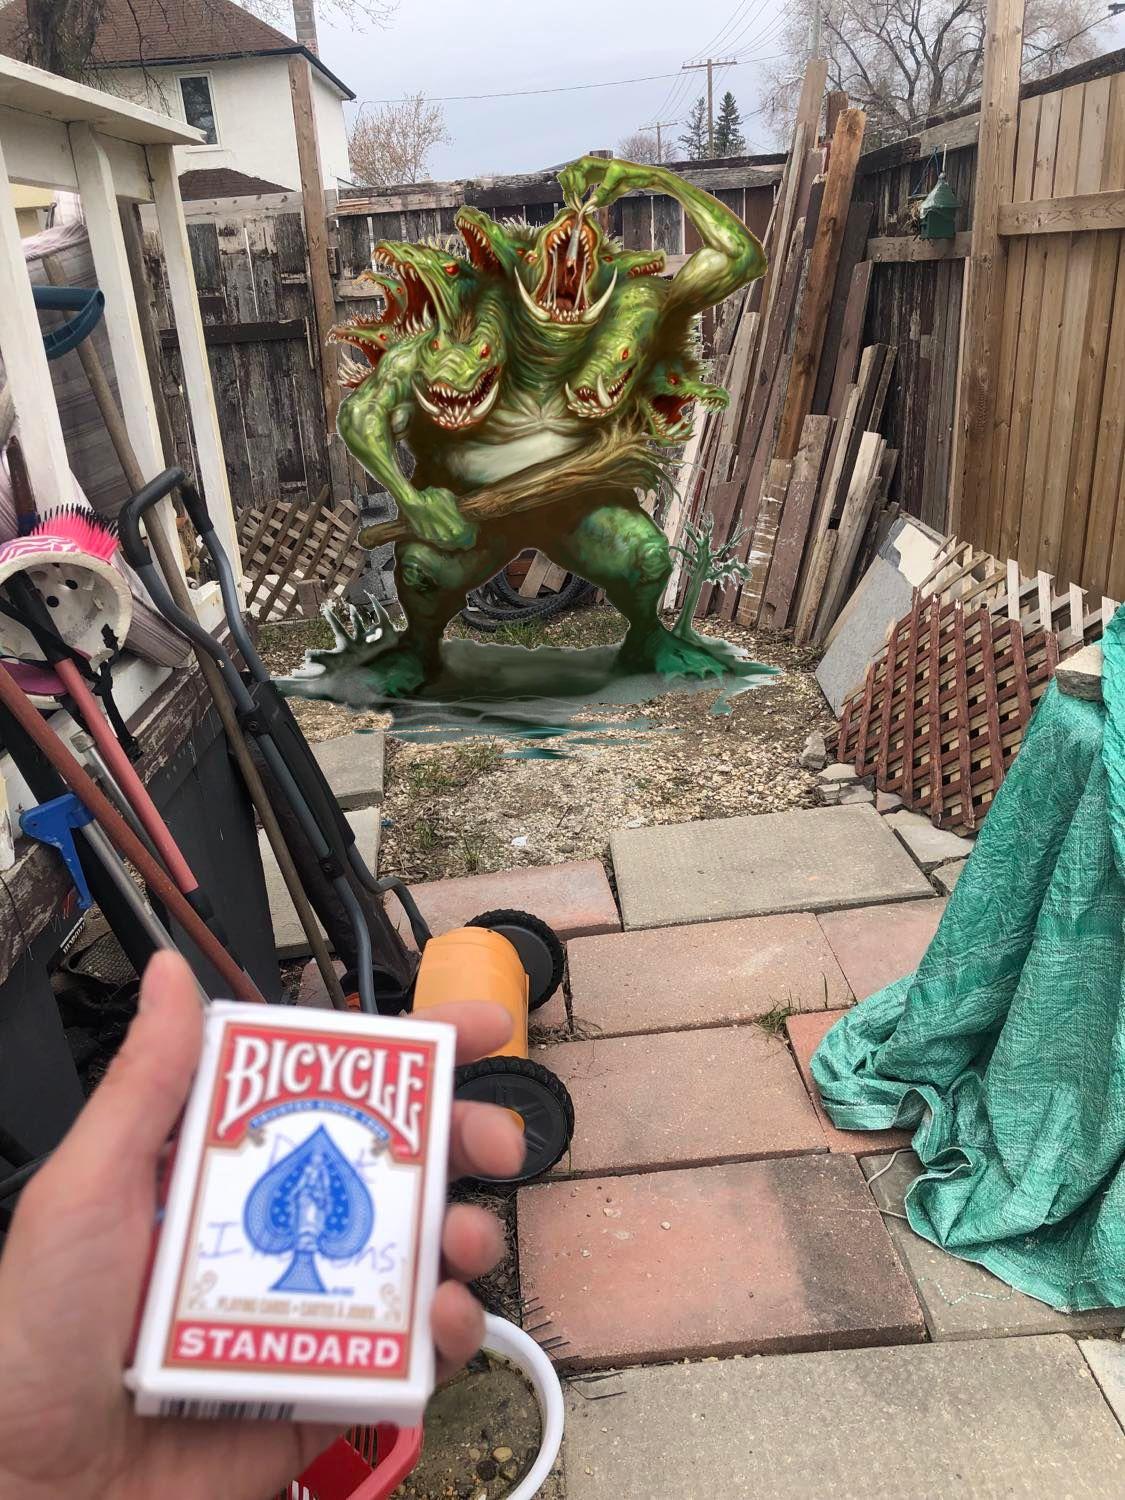 AAAAUUUUUUGGGGGHHHHH!!!! A troll is in the yard!!!! He's green and ugly and is holding a club and has like five, six heads growing out of it, like growing out of its back!!!! A hideous creature!!!! You hold out your deck, ready to draw.